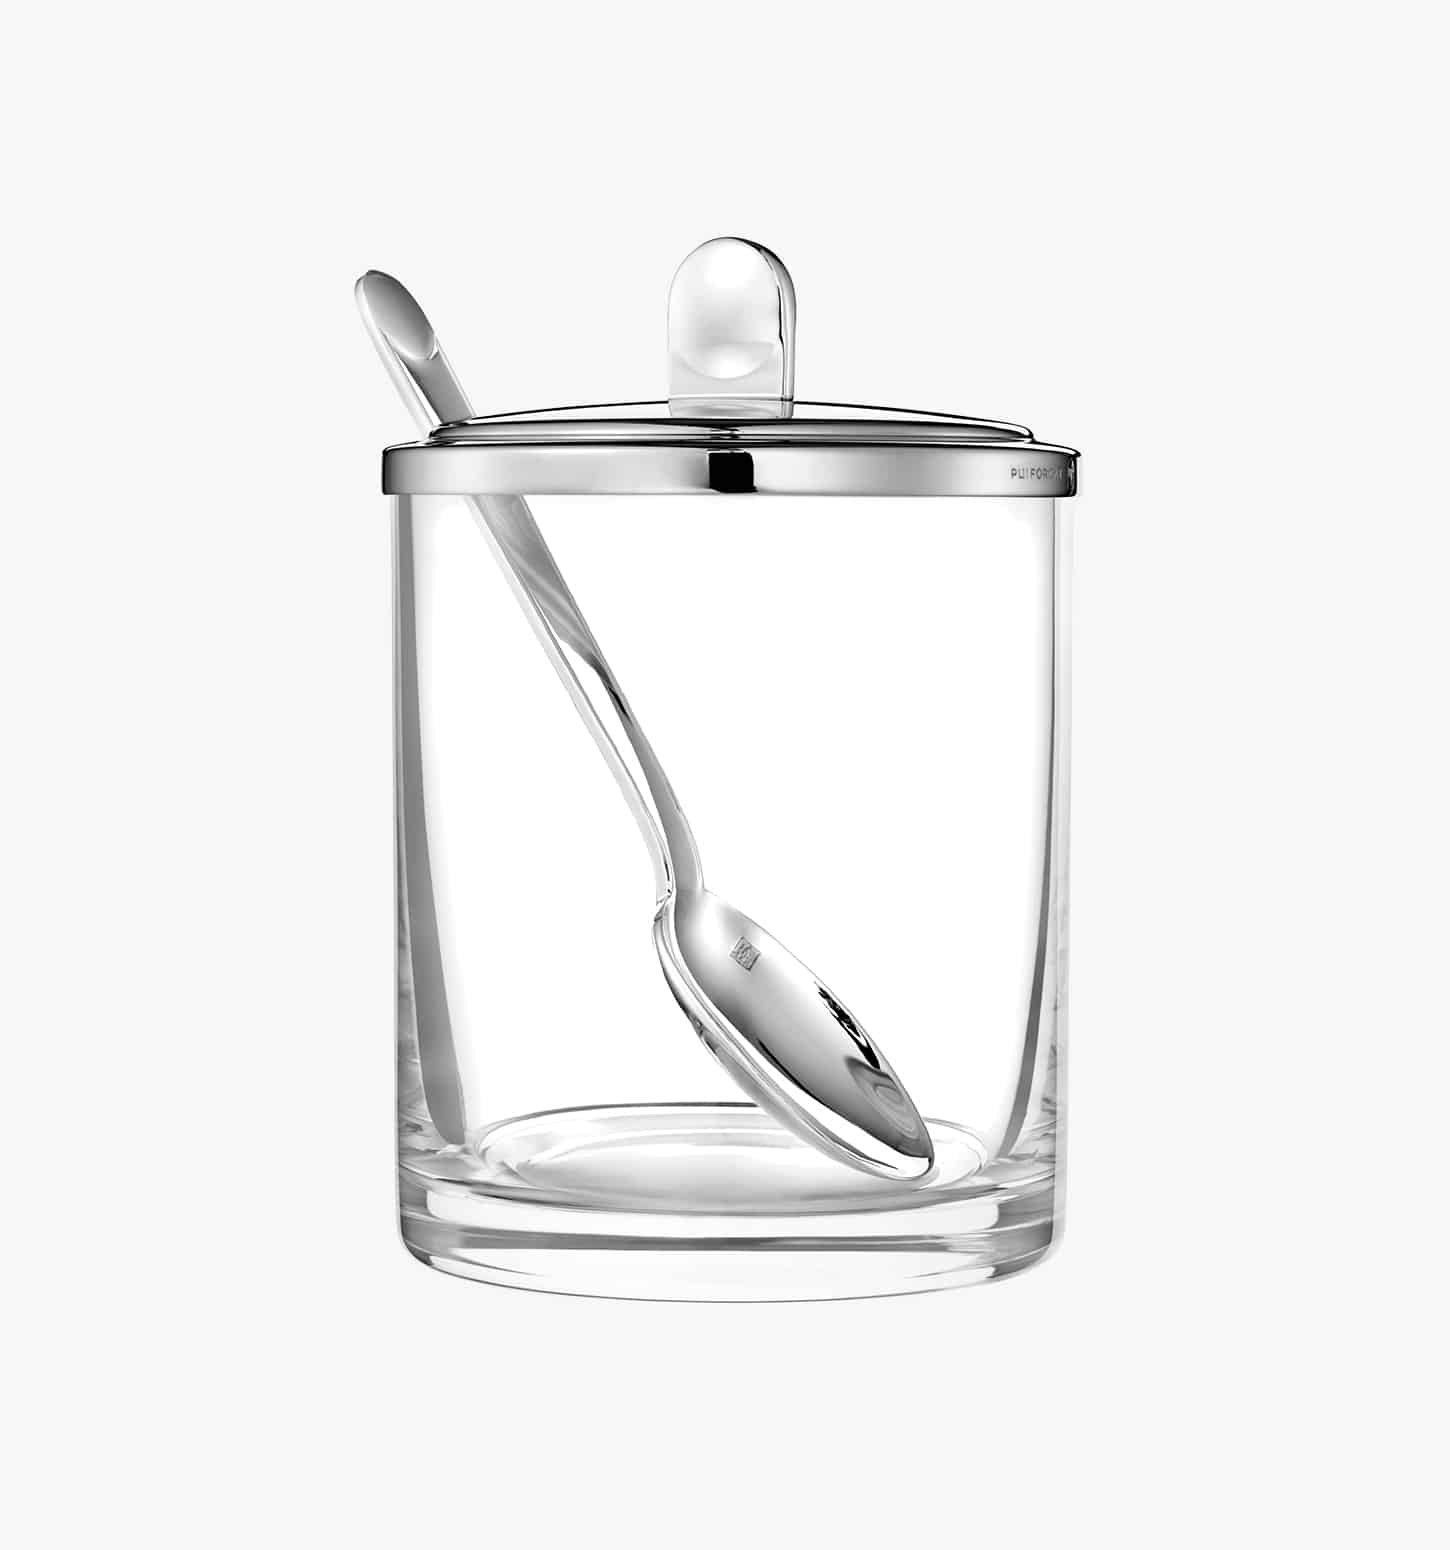 Jam pot in silver plated from Normandie collection from Puiforcat